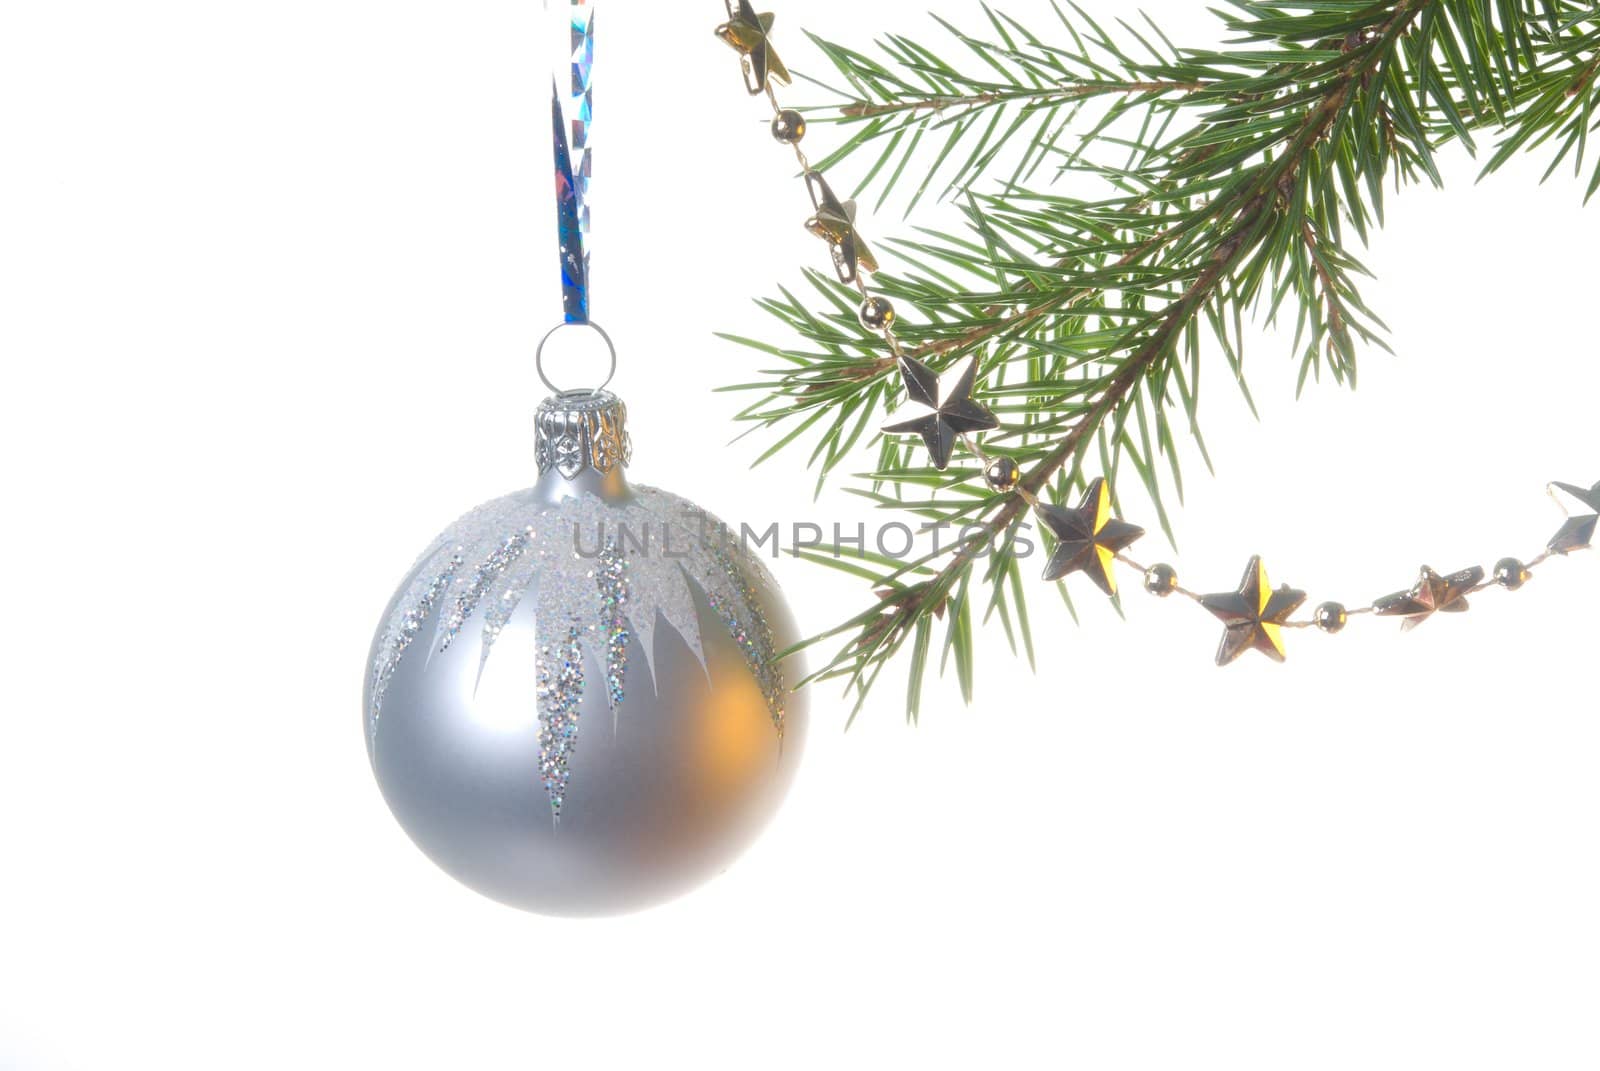 bright embellishment of the fir tree on cristmas,silver toy on white background